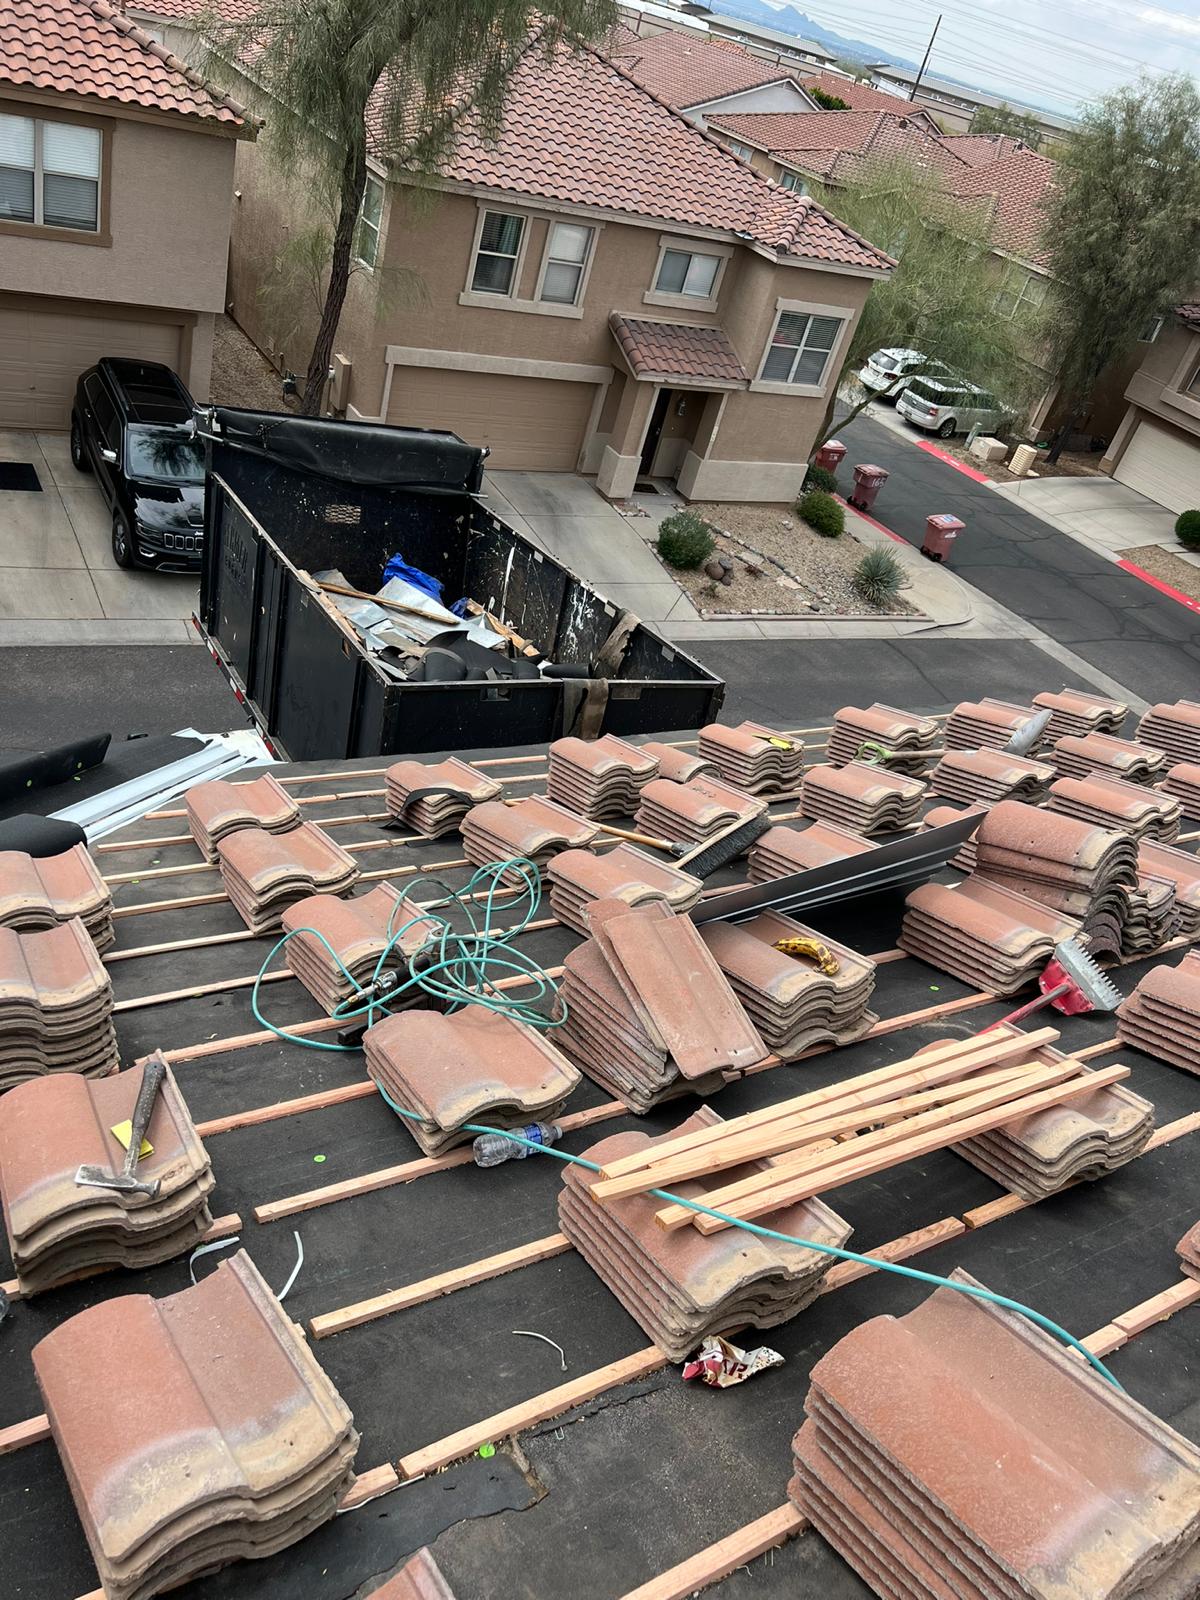 Tiles carefully organized by Behmer Roofing for a re-felt project under the Estancia sun.